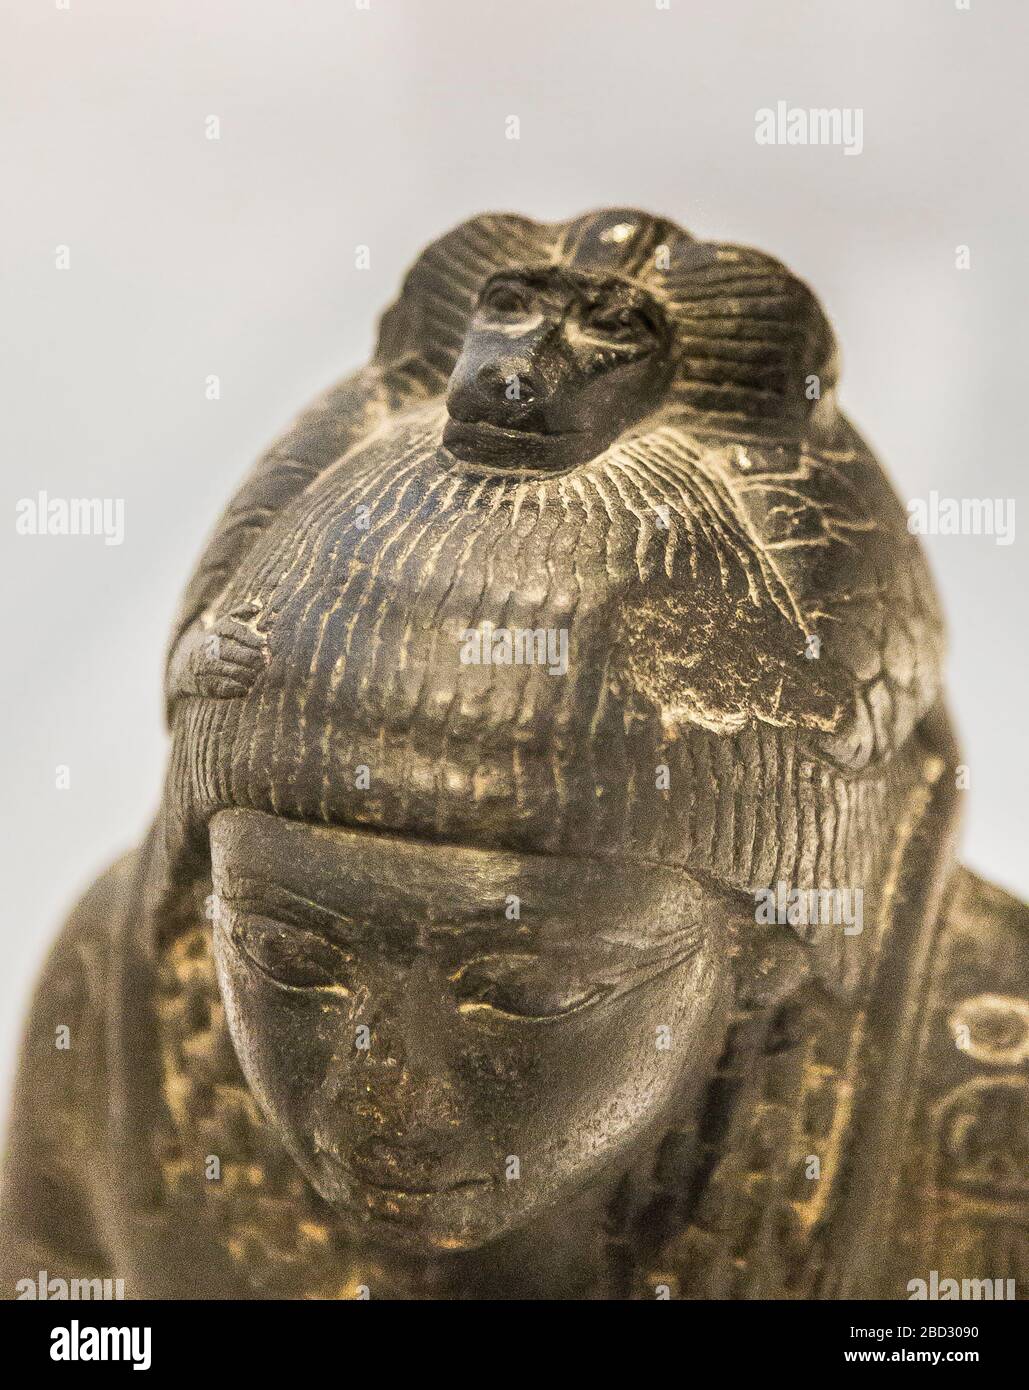 Exhibition 'The animal kingdom in Ancient Egypt', Louvre-Lens museum. Statue of Yupa, with Thot as a baboon on his head. New Kingdom, Basalt, E 25398. Stock Photo